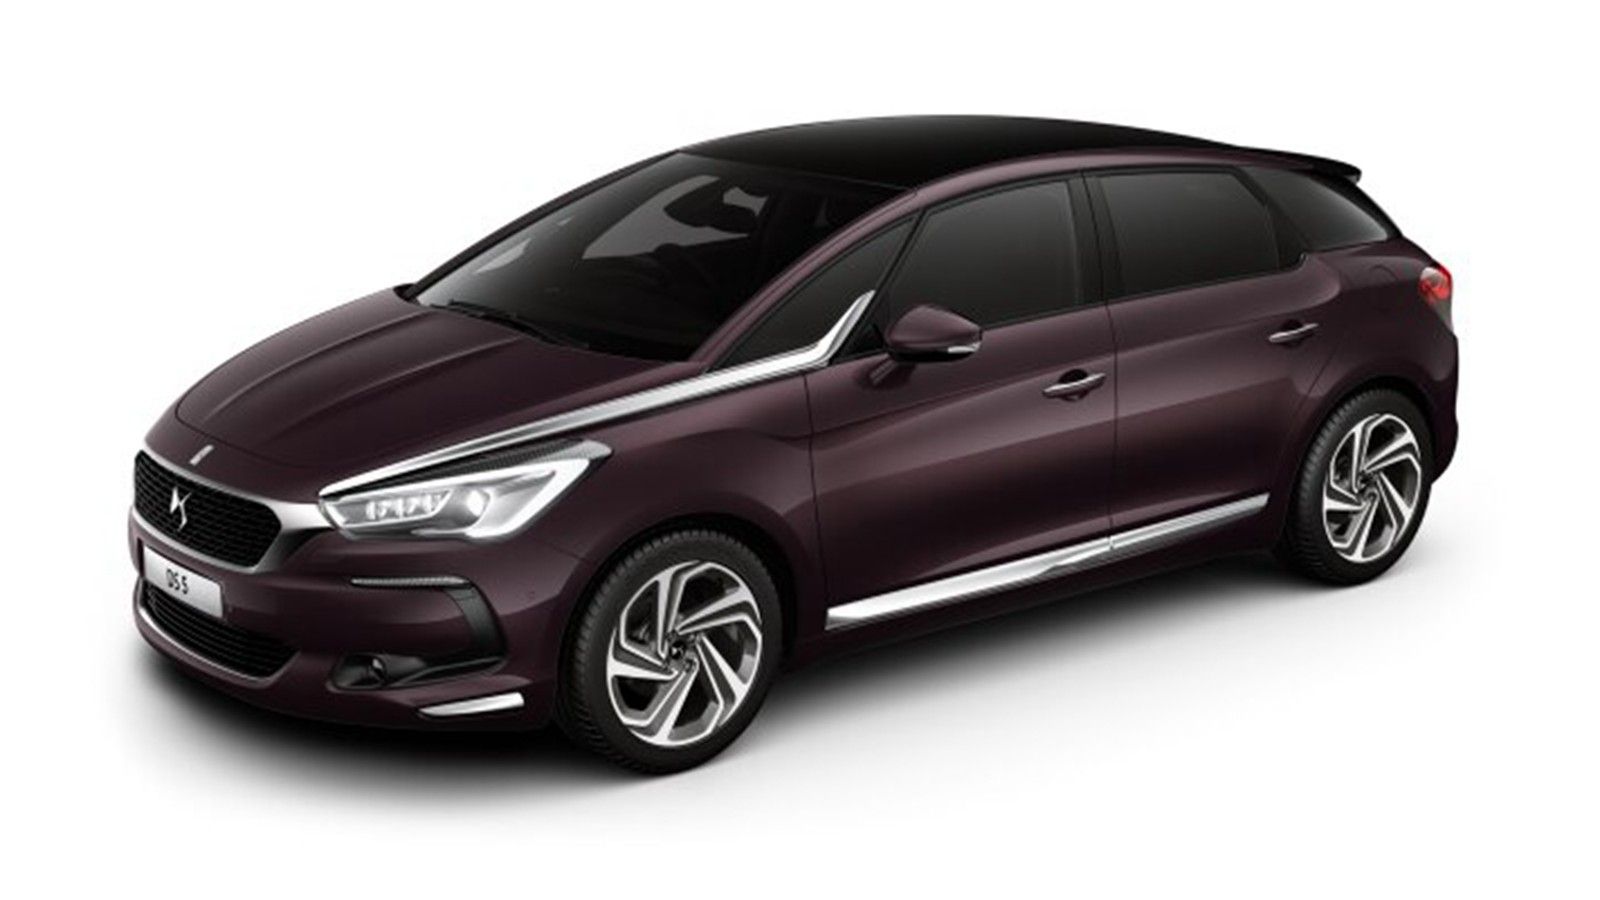 2018 Citroen DS5 1.6 THP Others 002